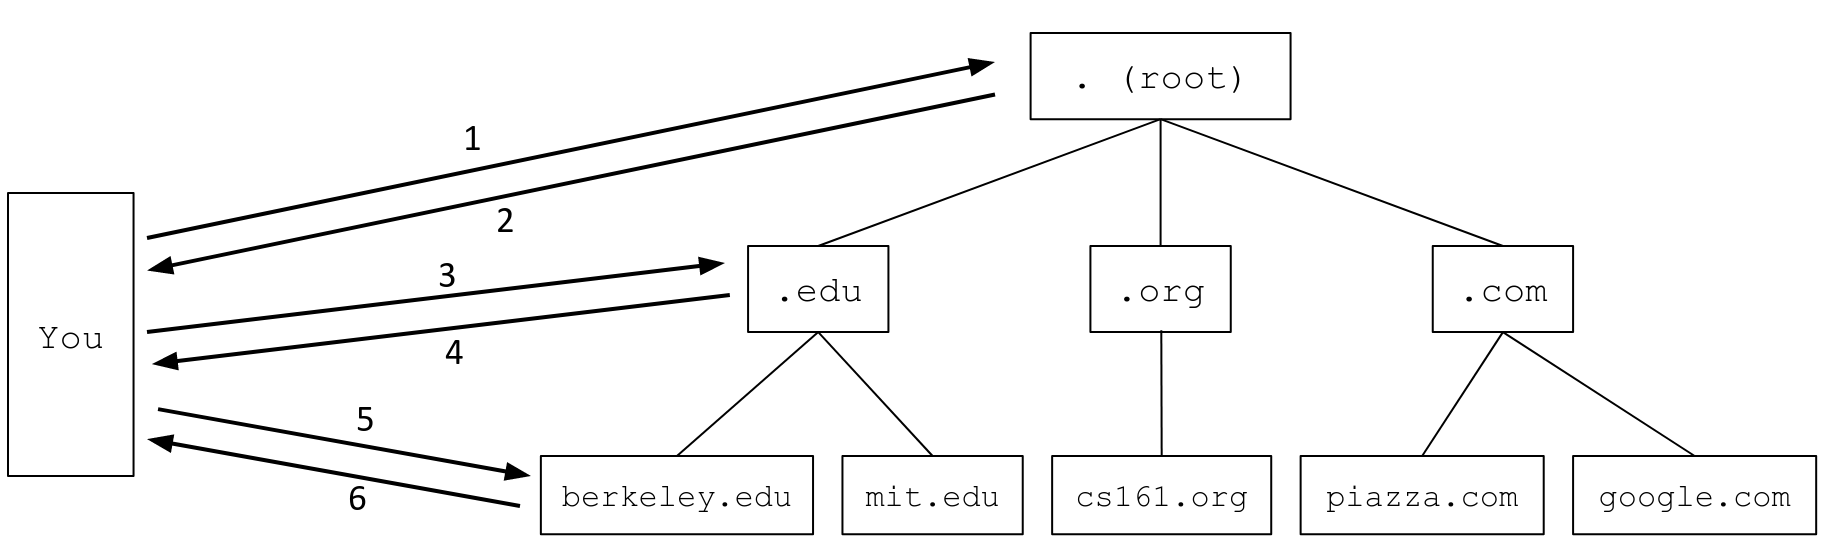 Diagram of a recursive DNS query, where your resolver queries the root nameserver first in query 1 and response 2, then the nameserver at the second level of the tree in query 3 and response 4, then a nameserver at the third level of the tree in query 5 and response 6